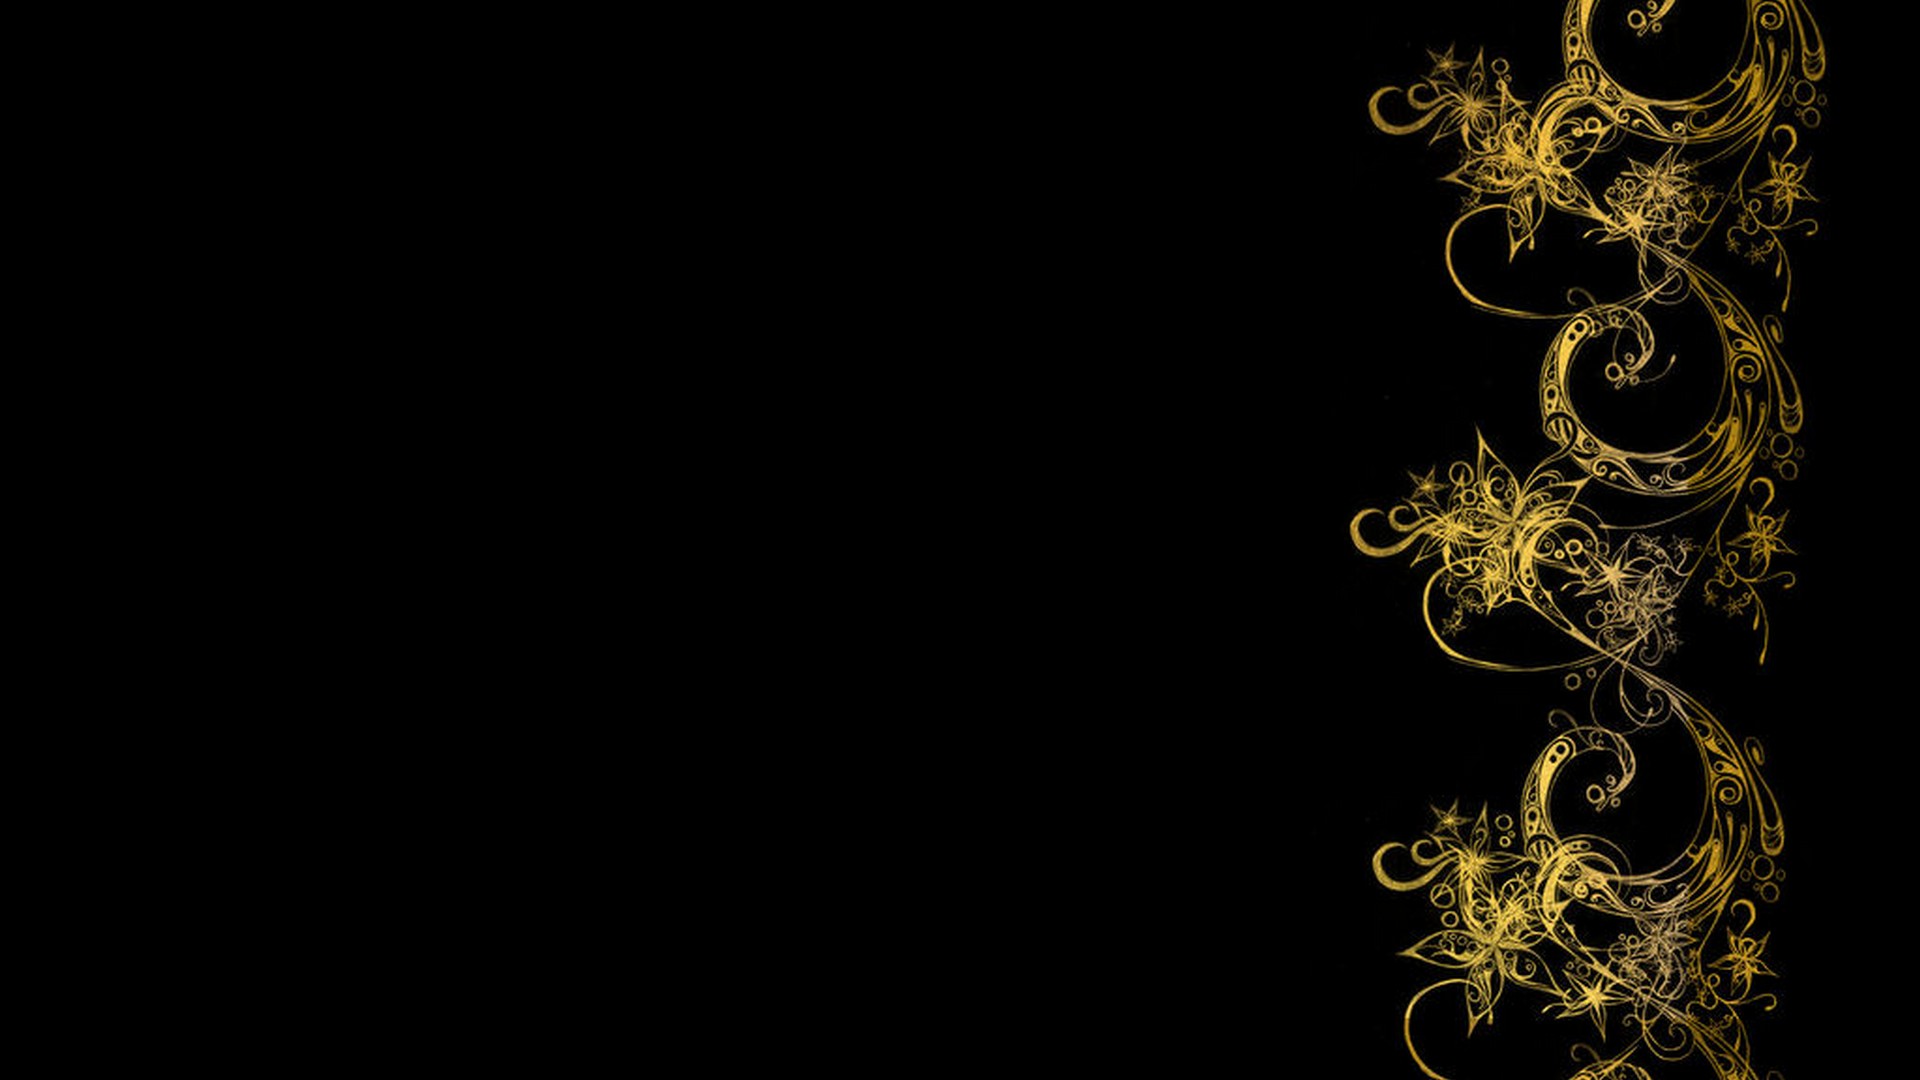 HD Wallpaper Black and Gold With Resolution 1920X1080